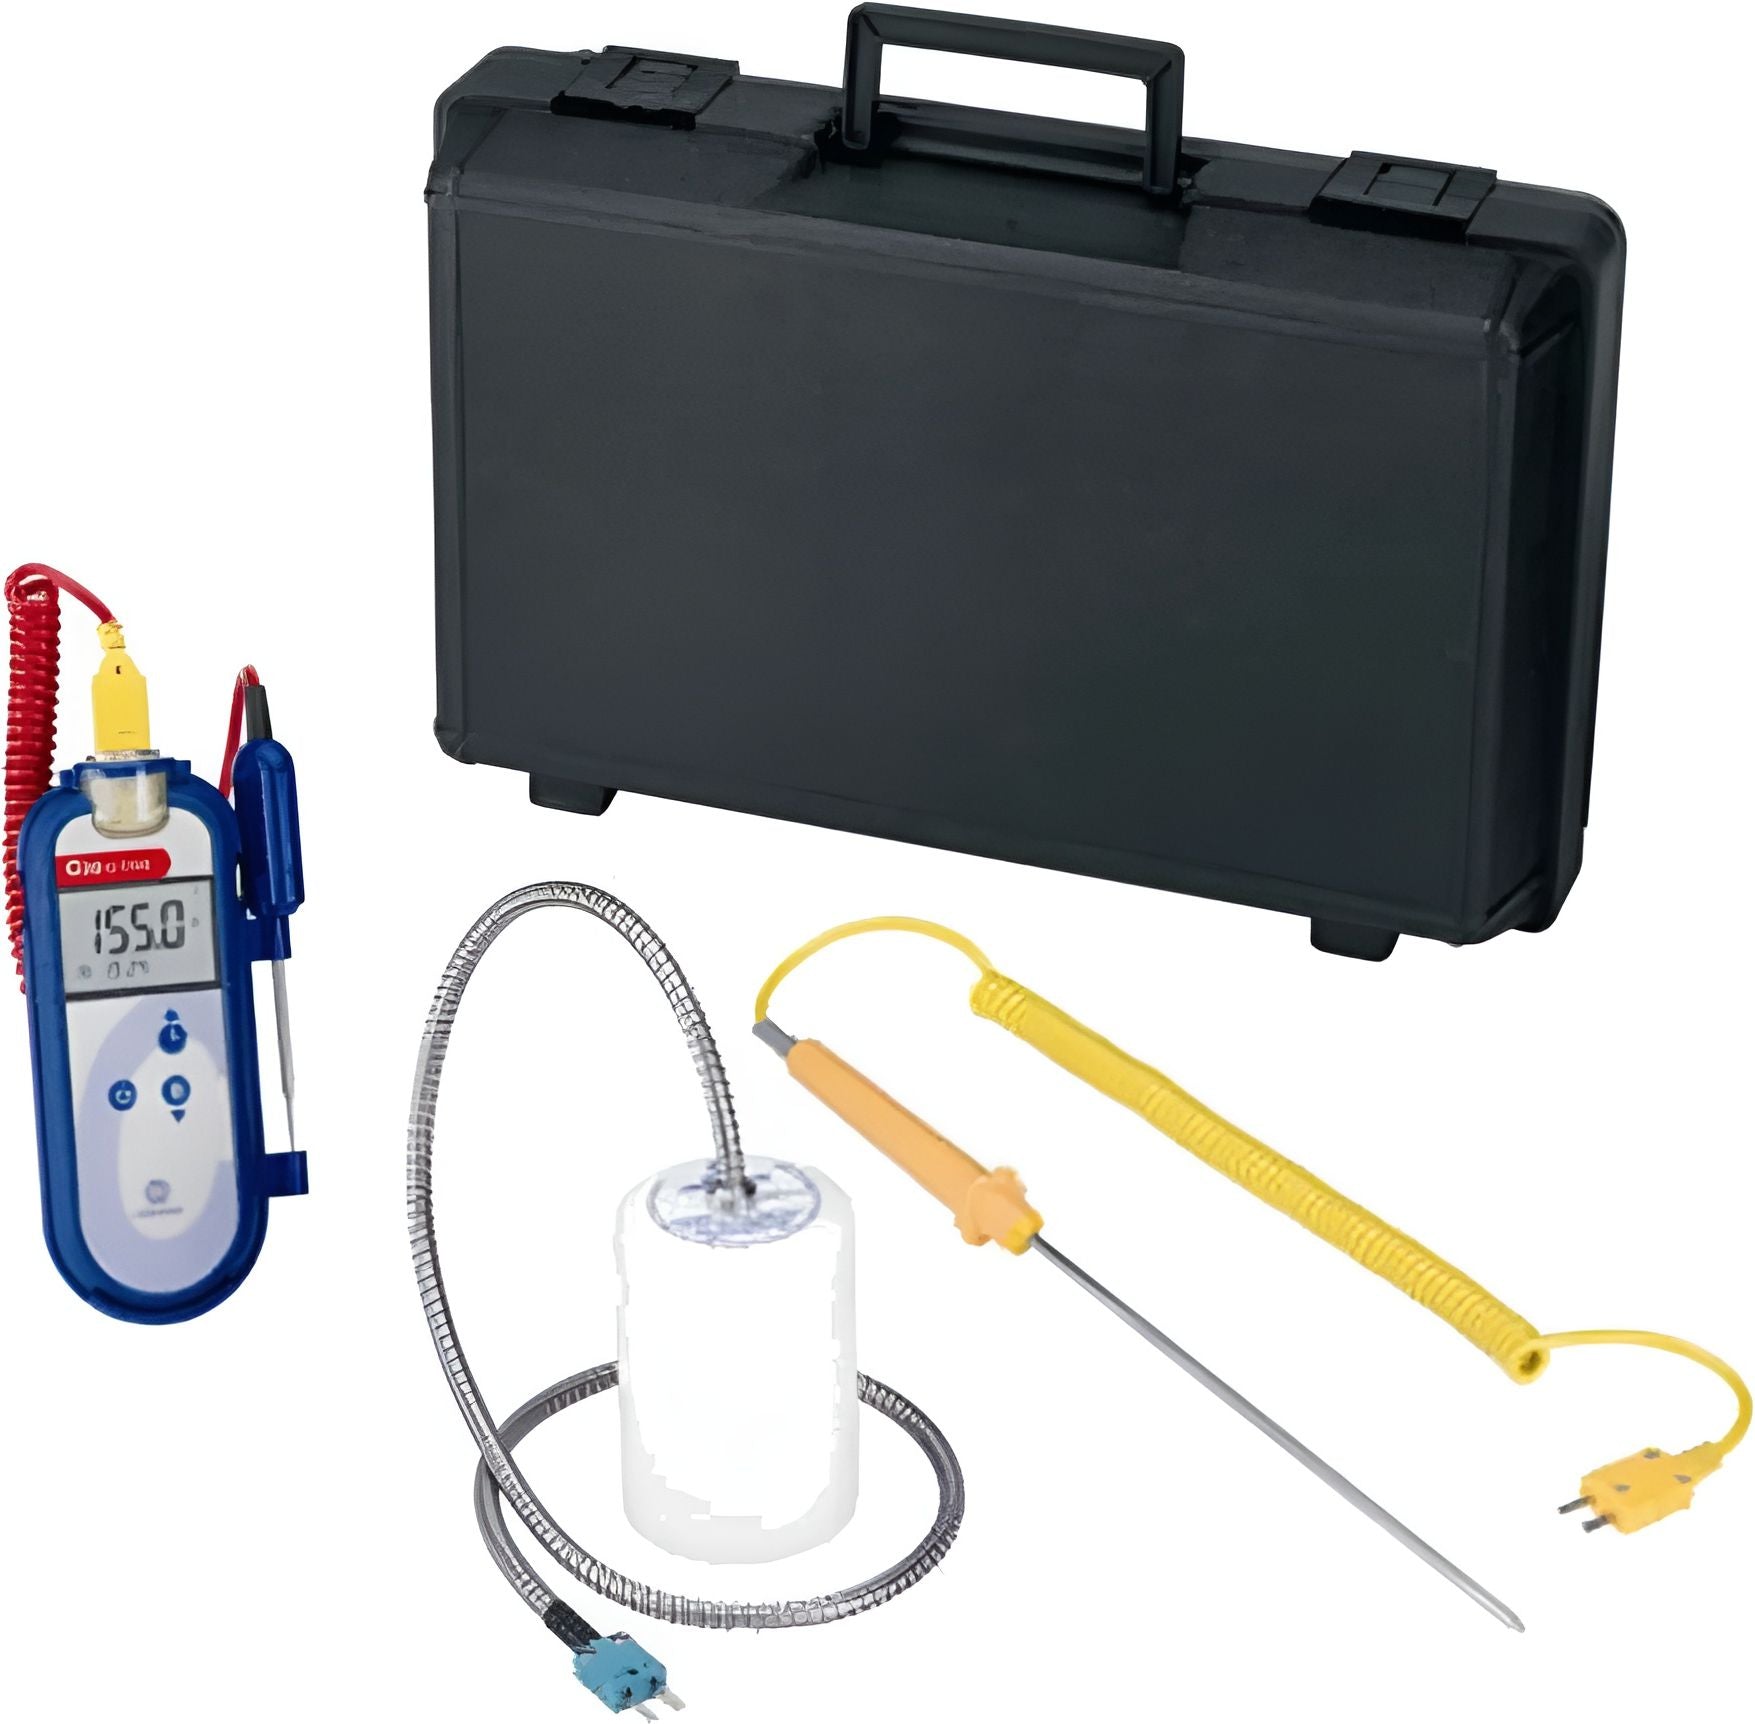 Comark - Type K Waterproof Thermometer Kit with 3 Probes, Wall-Mount Bracket / Stand and Hard Carry Case- C48/P18